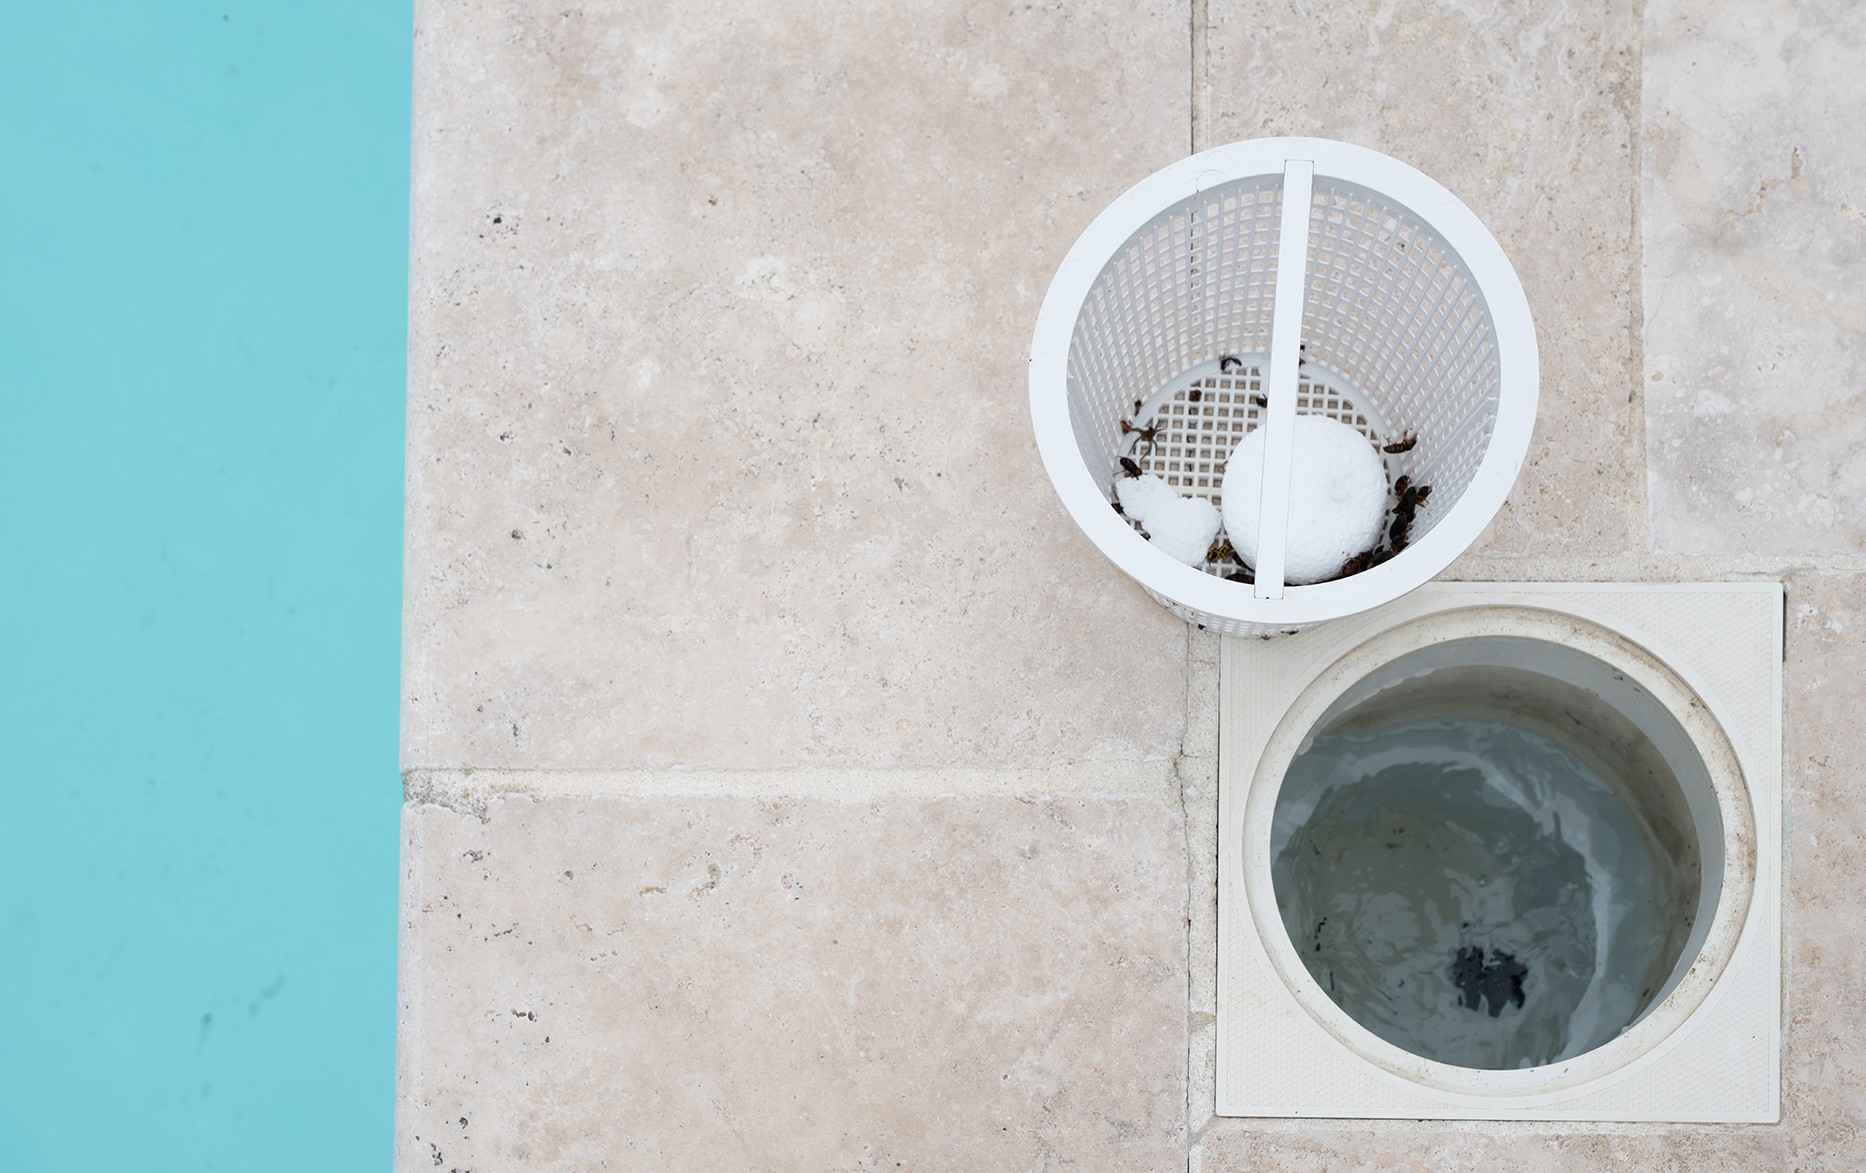 How to Clean a Pool Filter